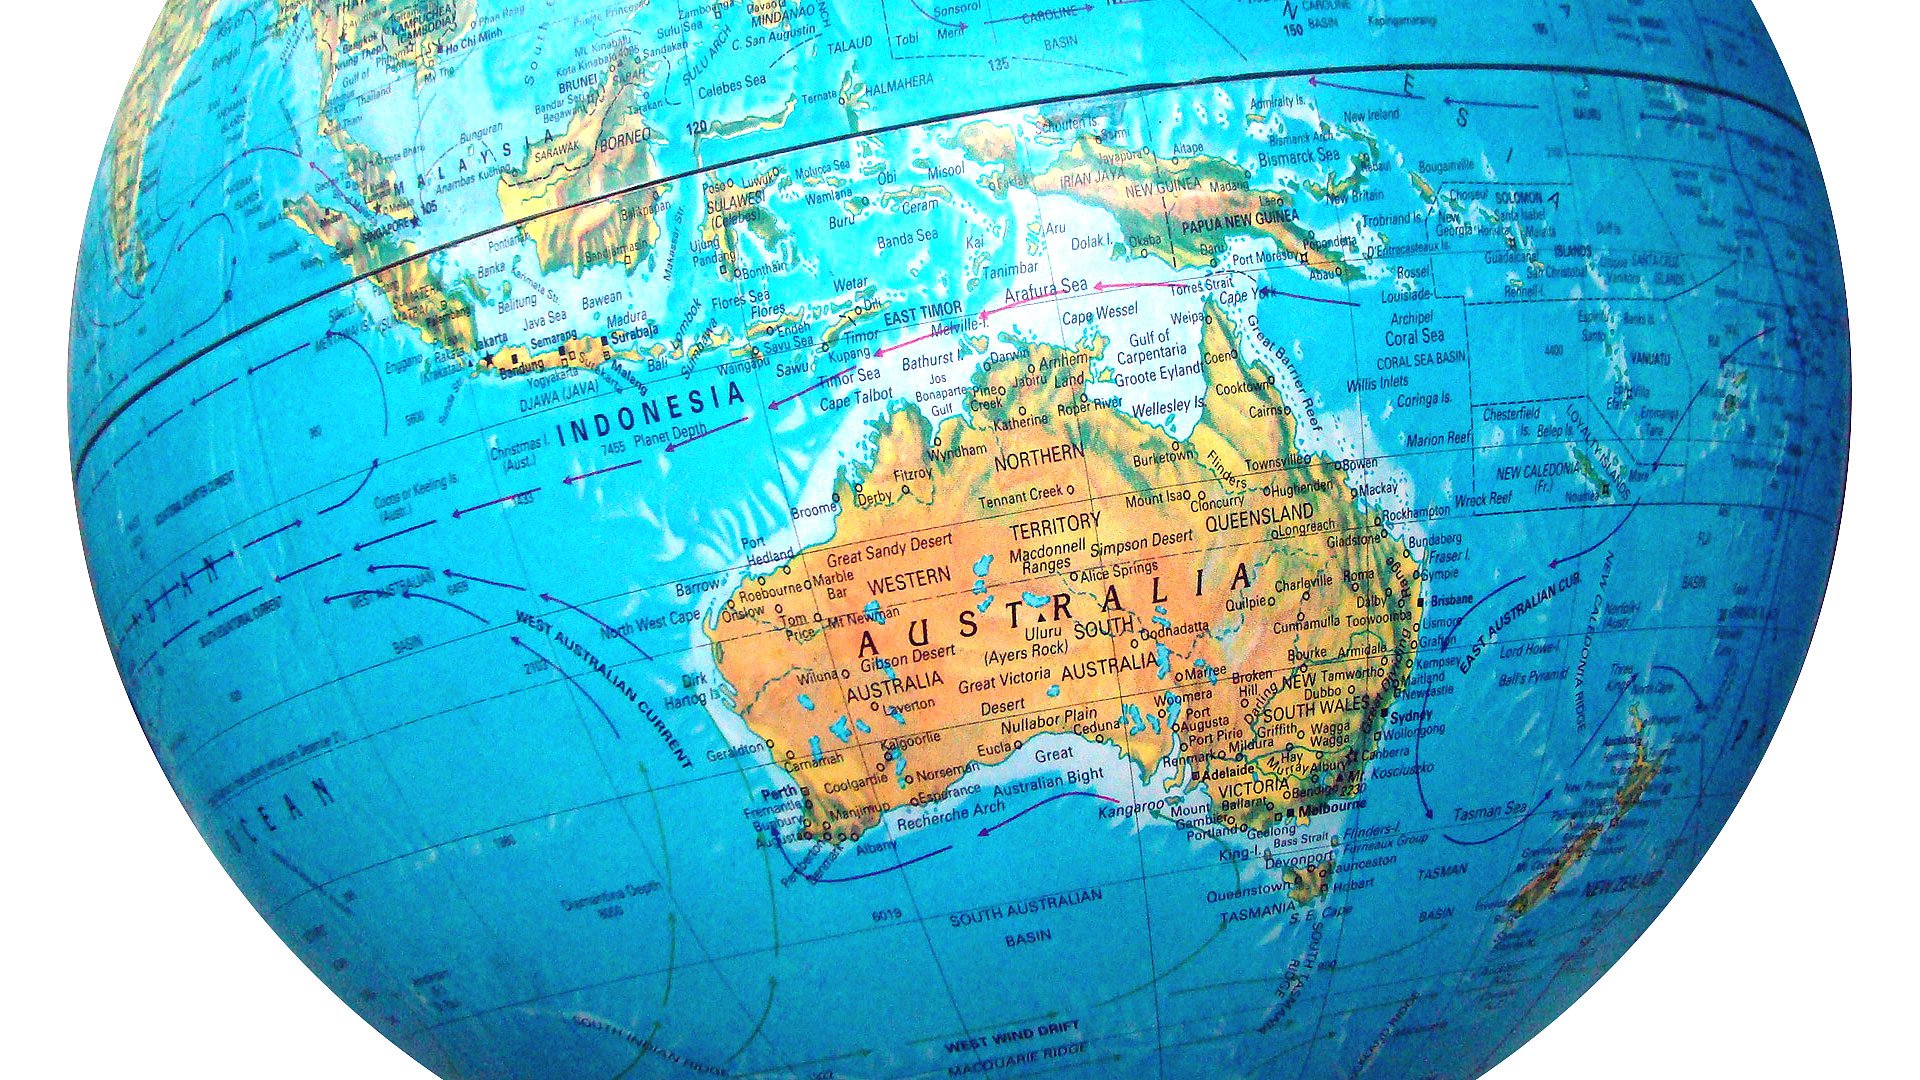 Supercontinent Nuna brought together Australia and Canada 1.7 billion years ago